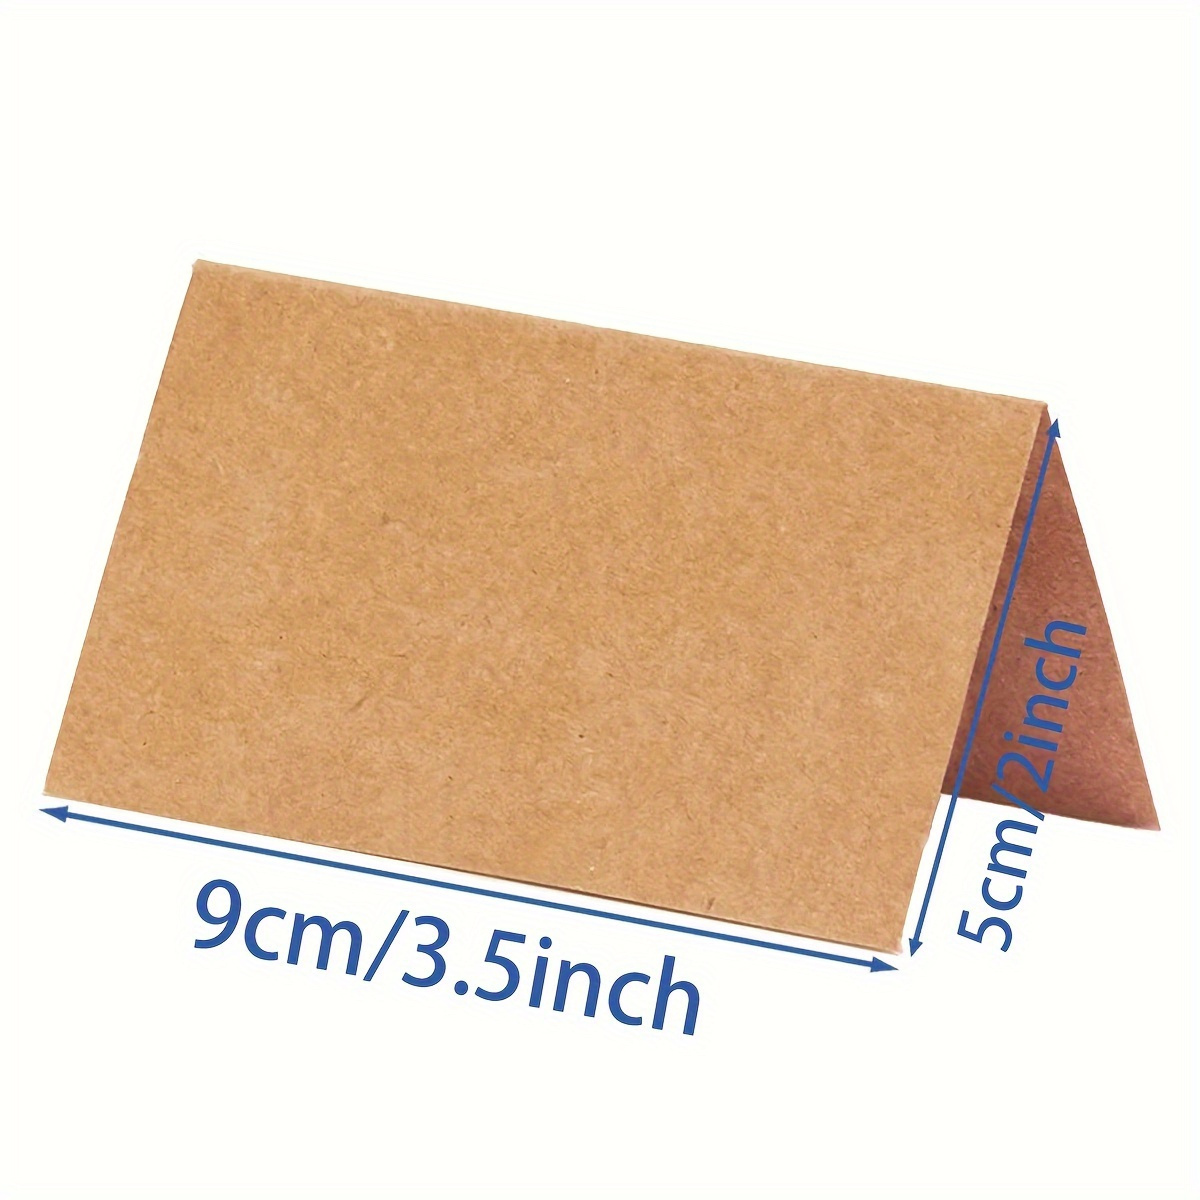 

100/50/25pcs, Seat Cards, Kraft Paper Place Cards For Table Setting, Blank Name Cards For Wedding Reception, Baby Shower, Graduation, Birthday, Table Numbers, Accessories, Christmas Decorations